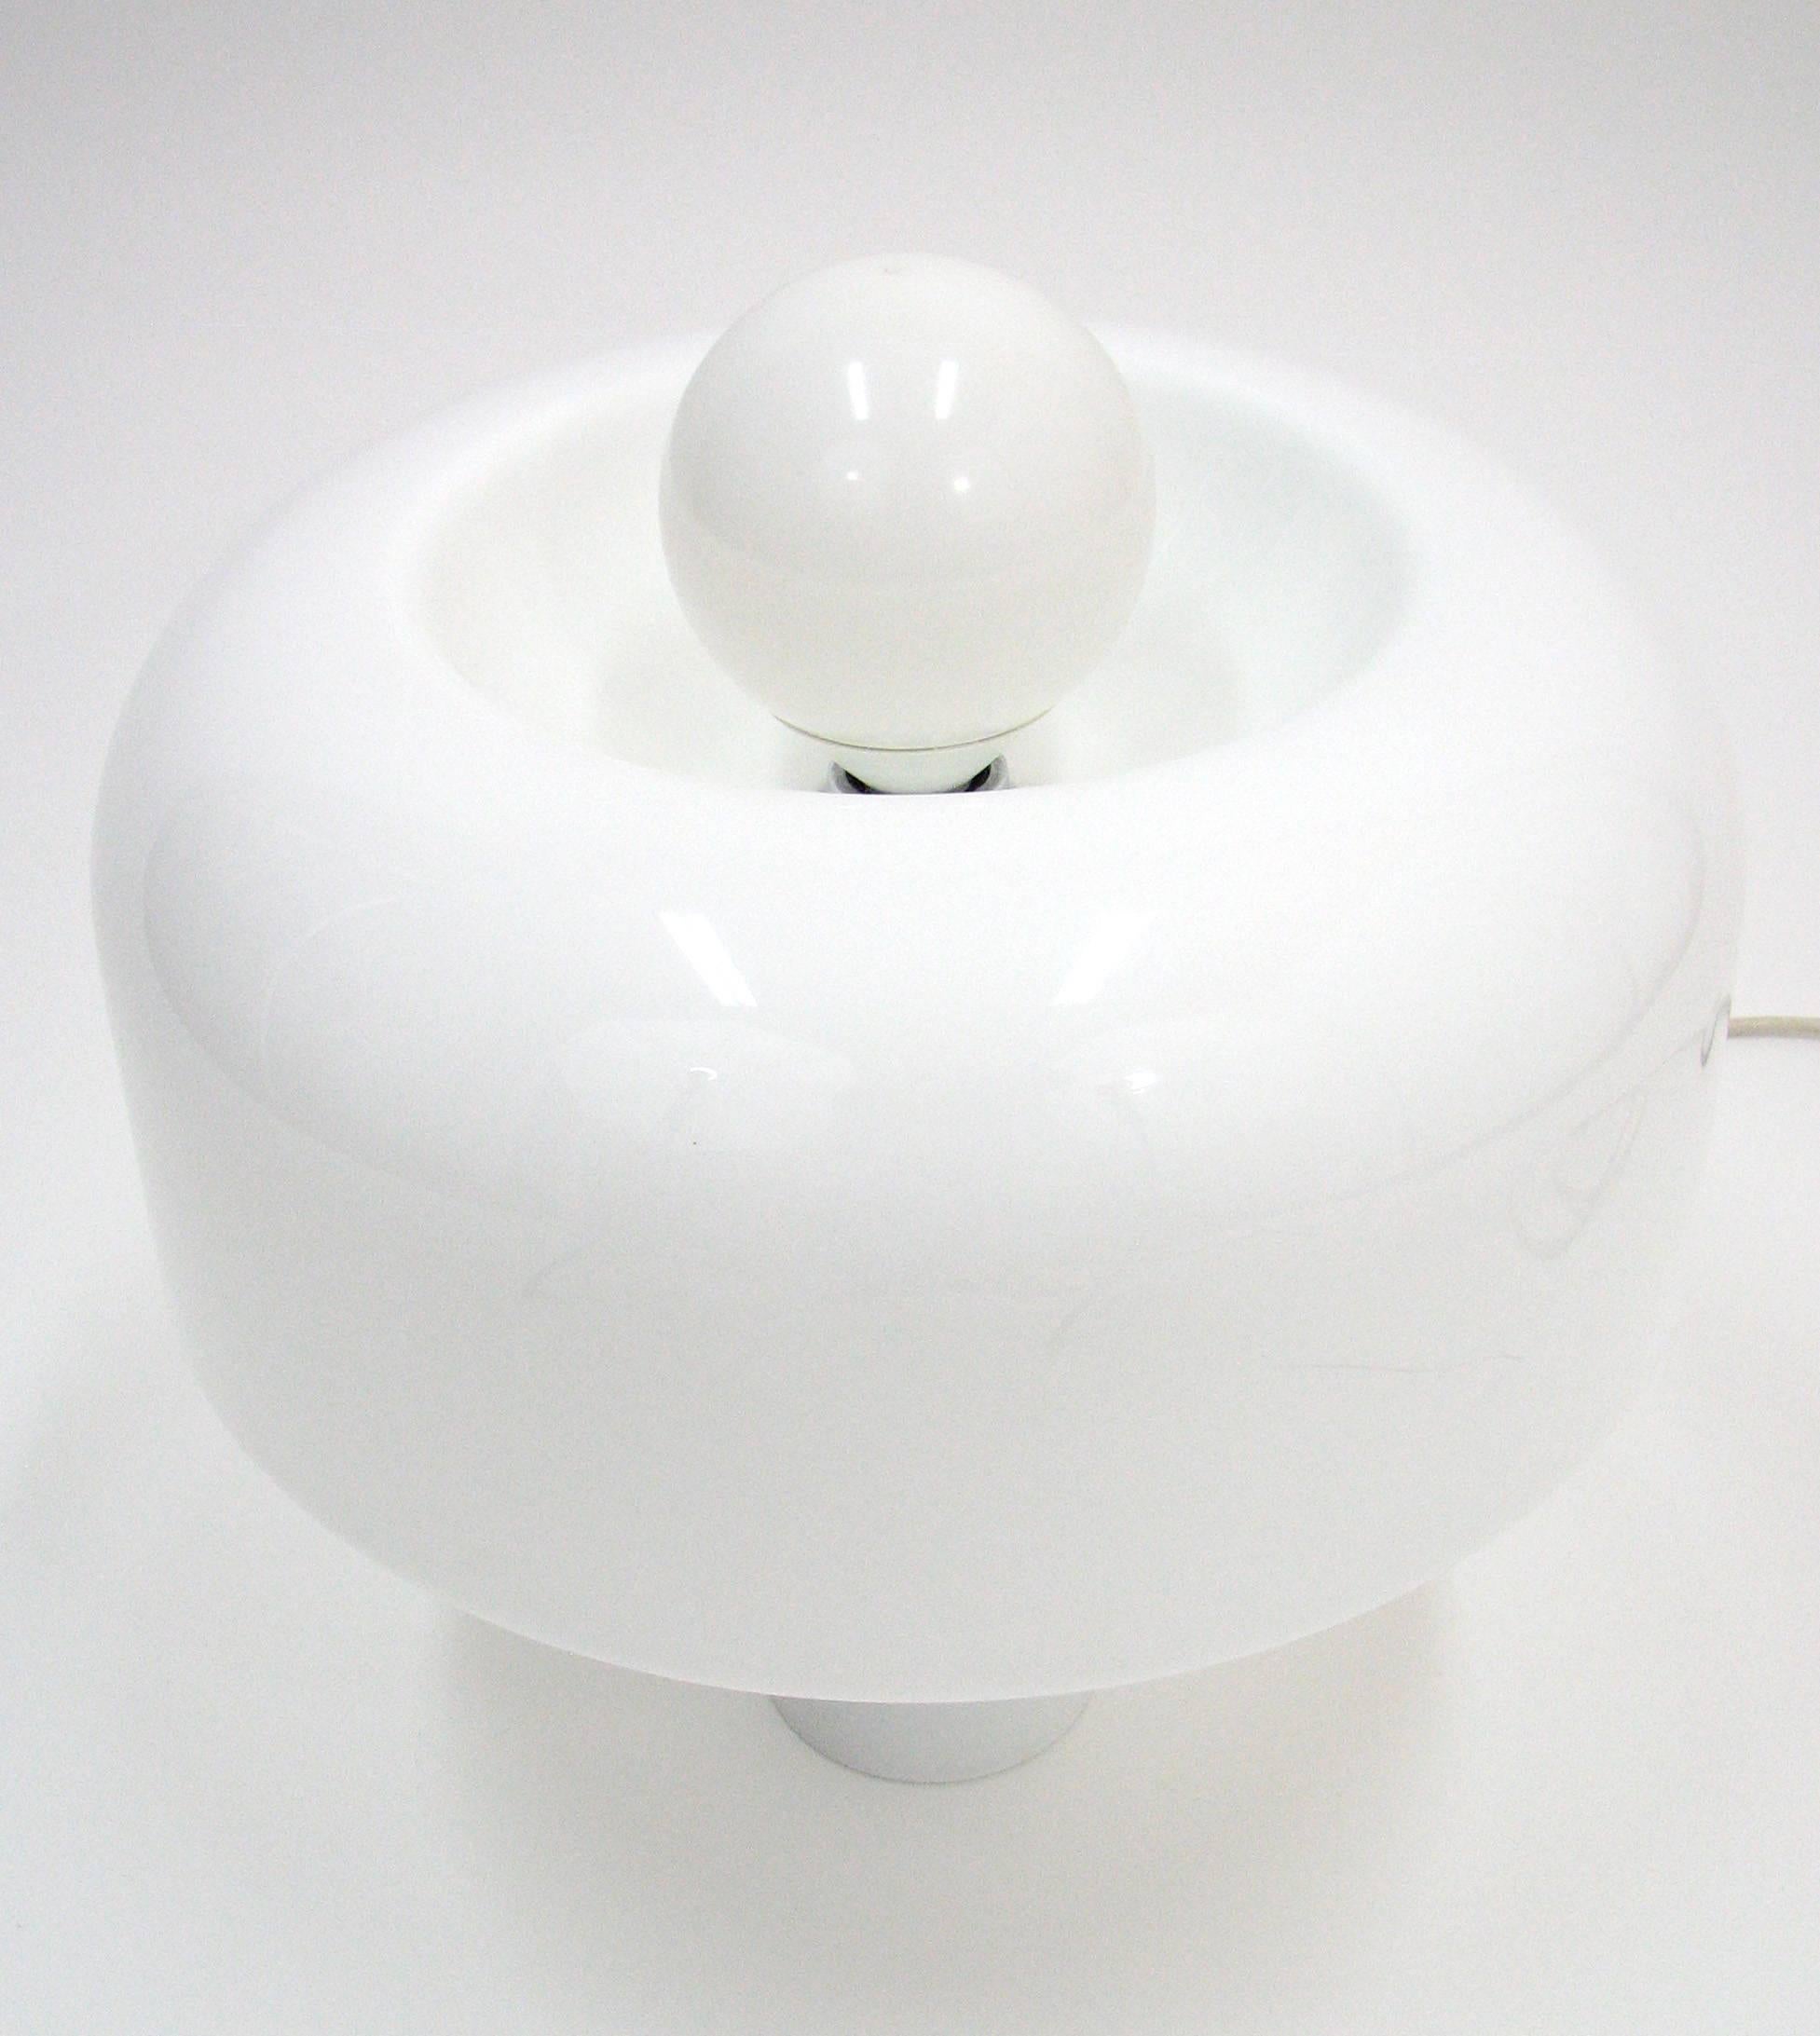 A rare all-white Brumbury table lamp designed by Luigi Massoni for Harvey Guzzini.

Four-light sources - top globe bulb socket and three smaller bulb sockets under the shade. European plug. Requires a simple plug converter (readily available from